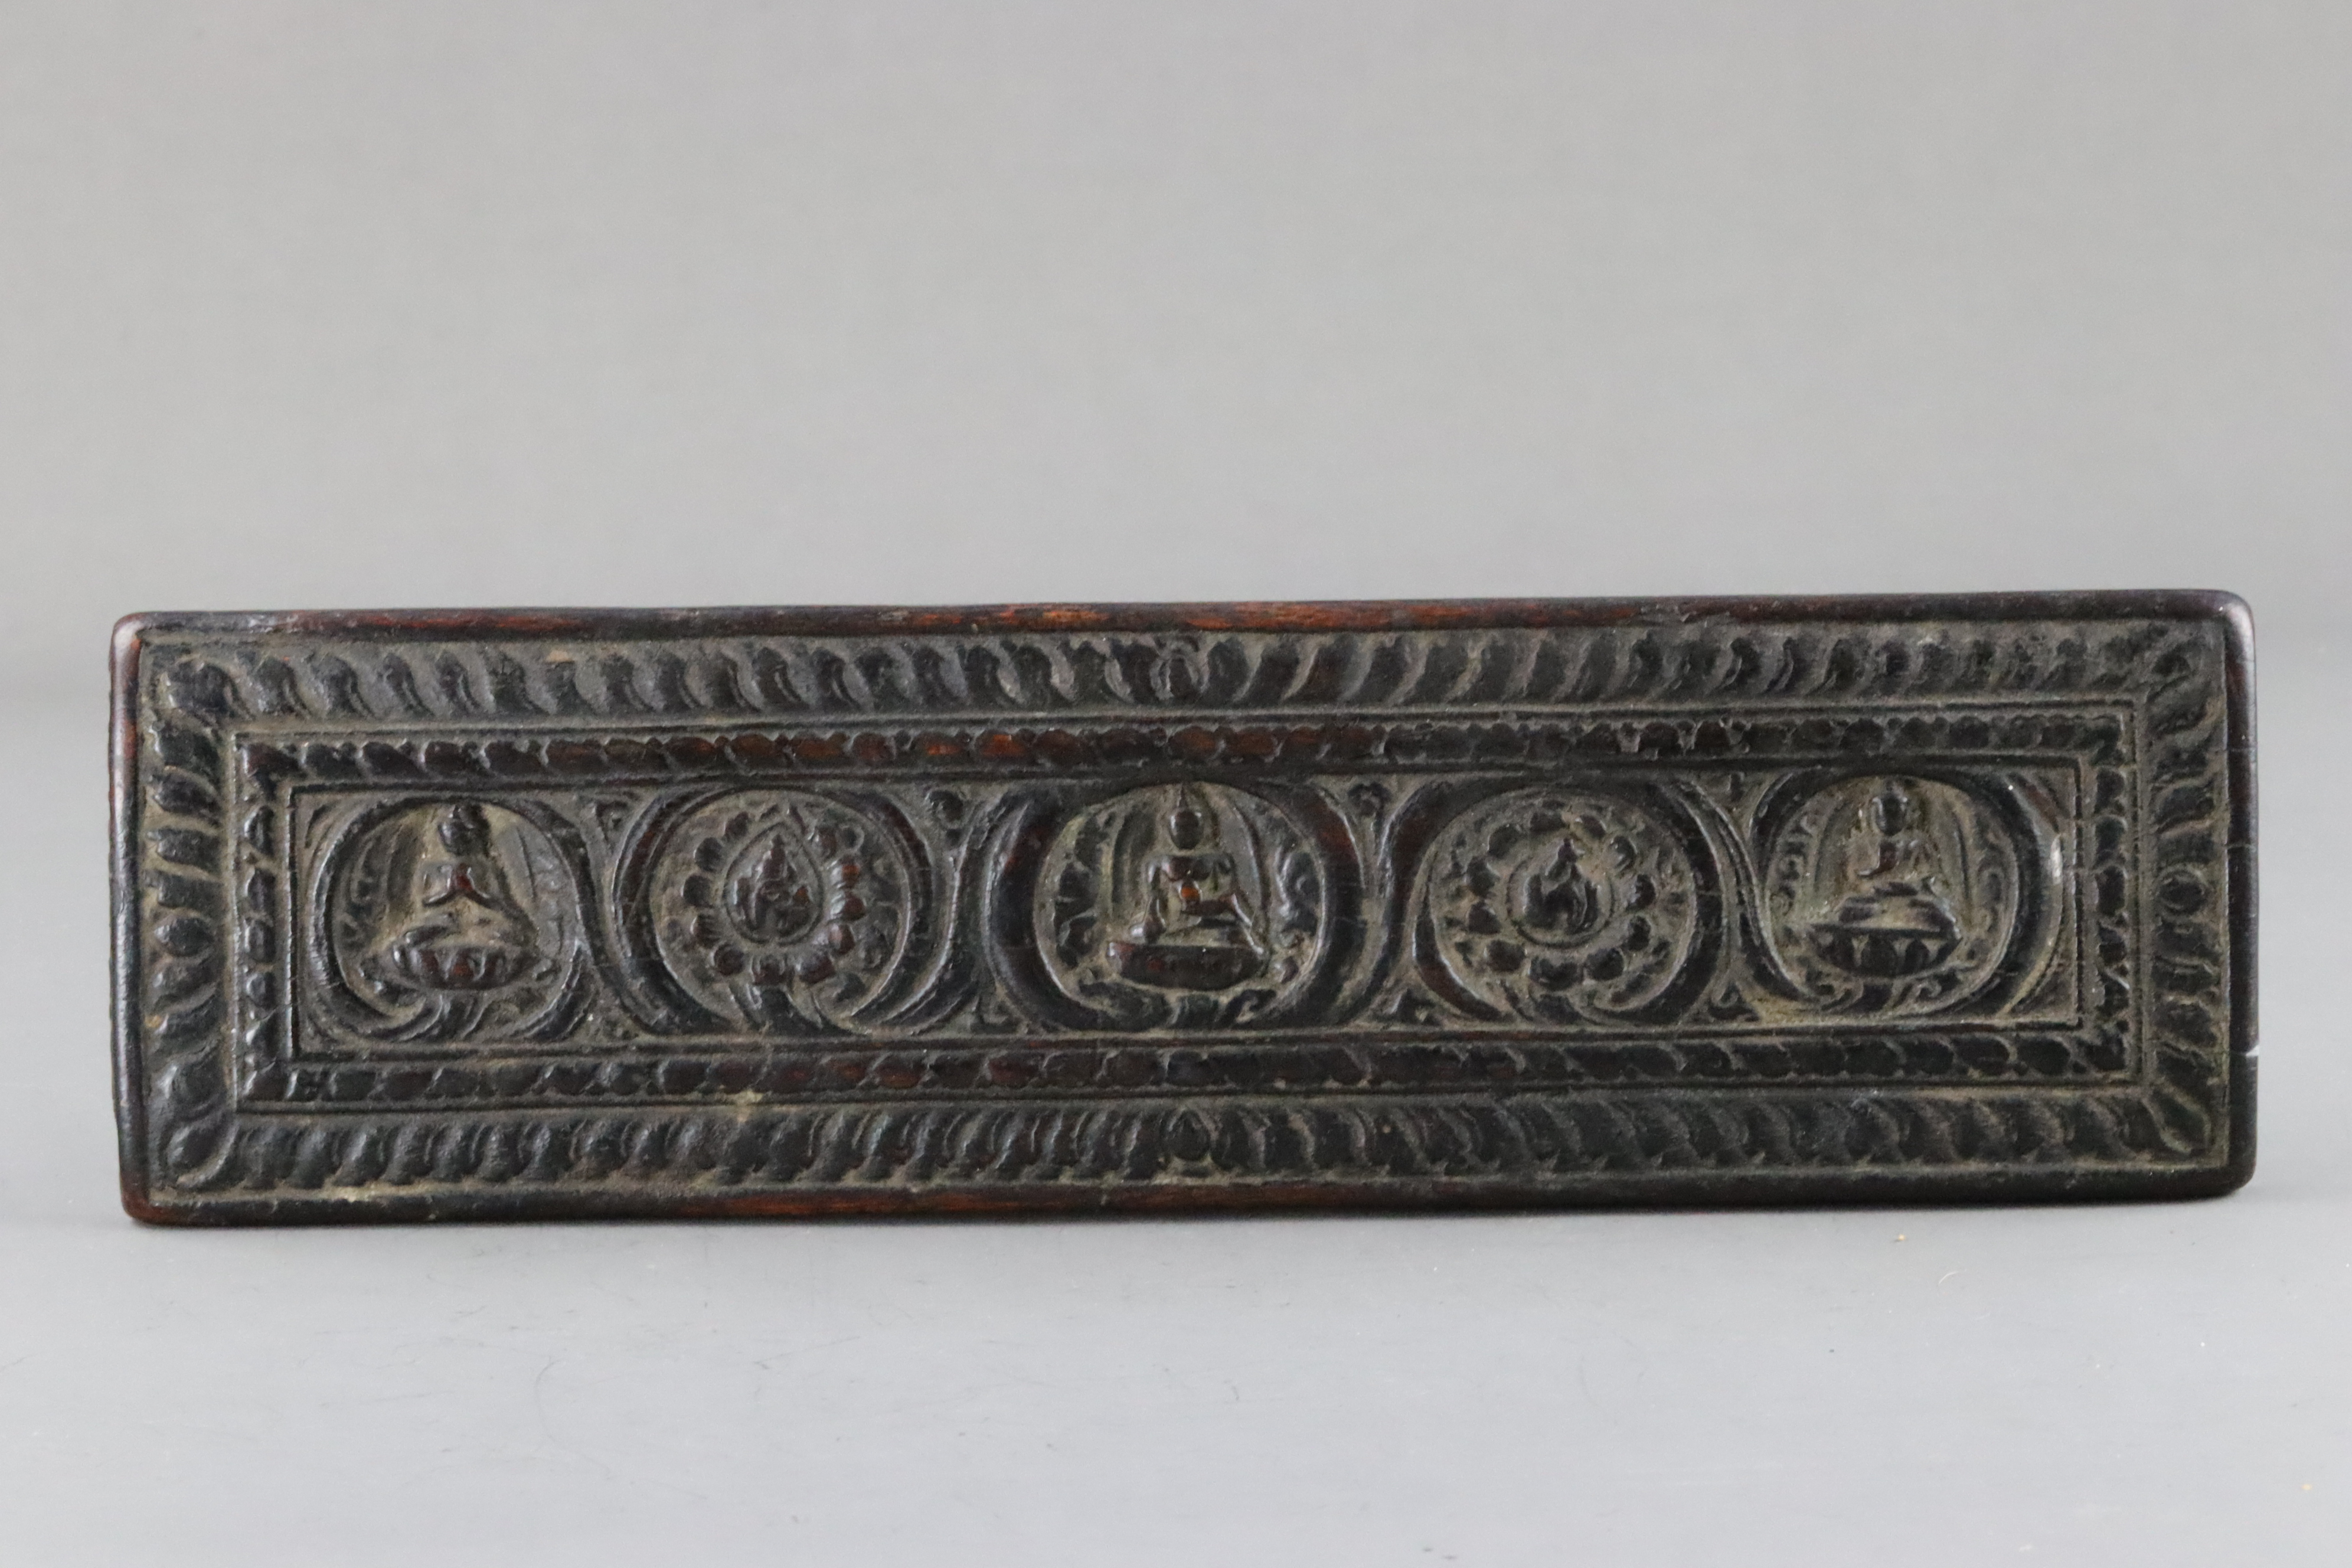 A Blackwood Book Cover carved with Buddhas, 15th century - Image 2 of 8